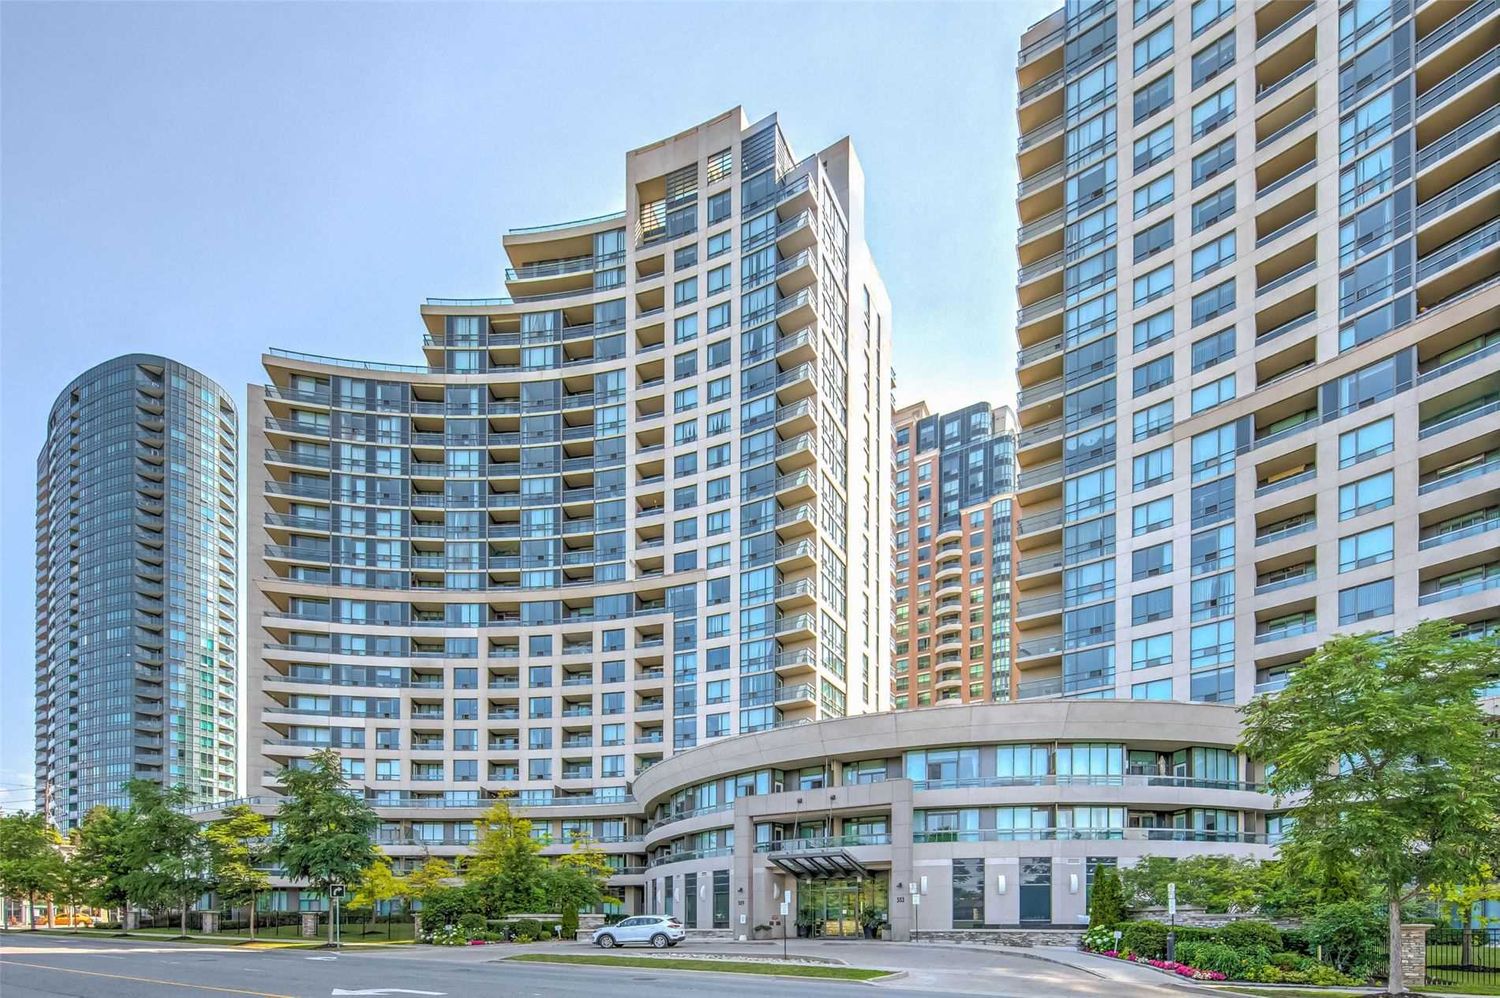 509 Beecroft Road. The Continental Condos is located in  North York, Toronto - image #1 of 2